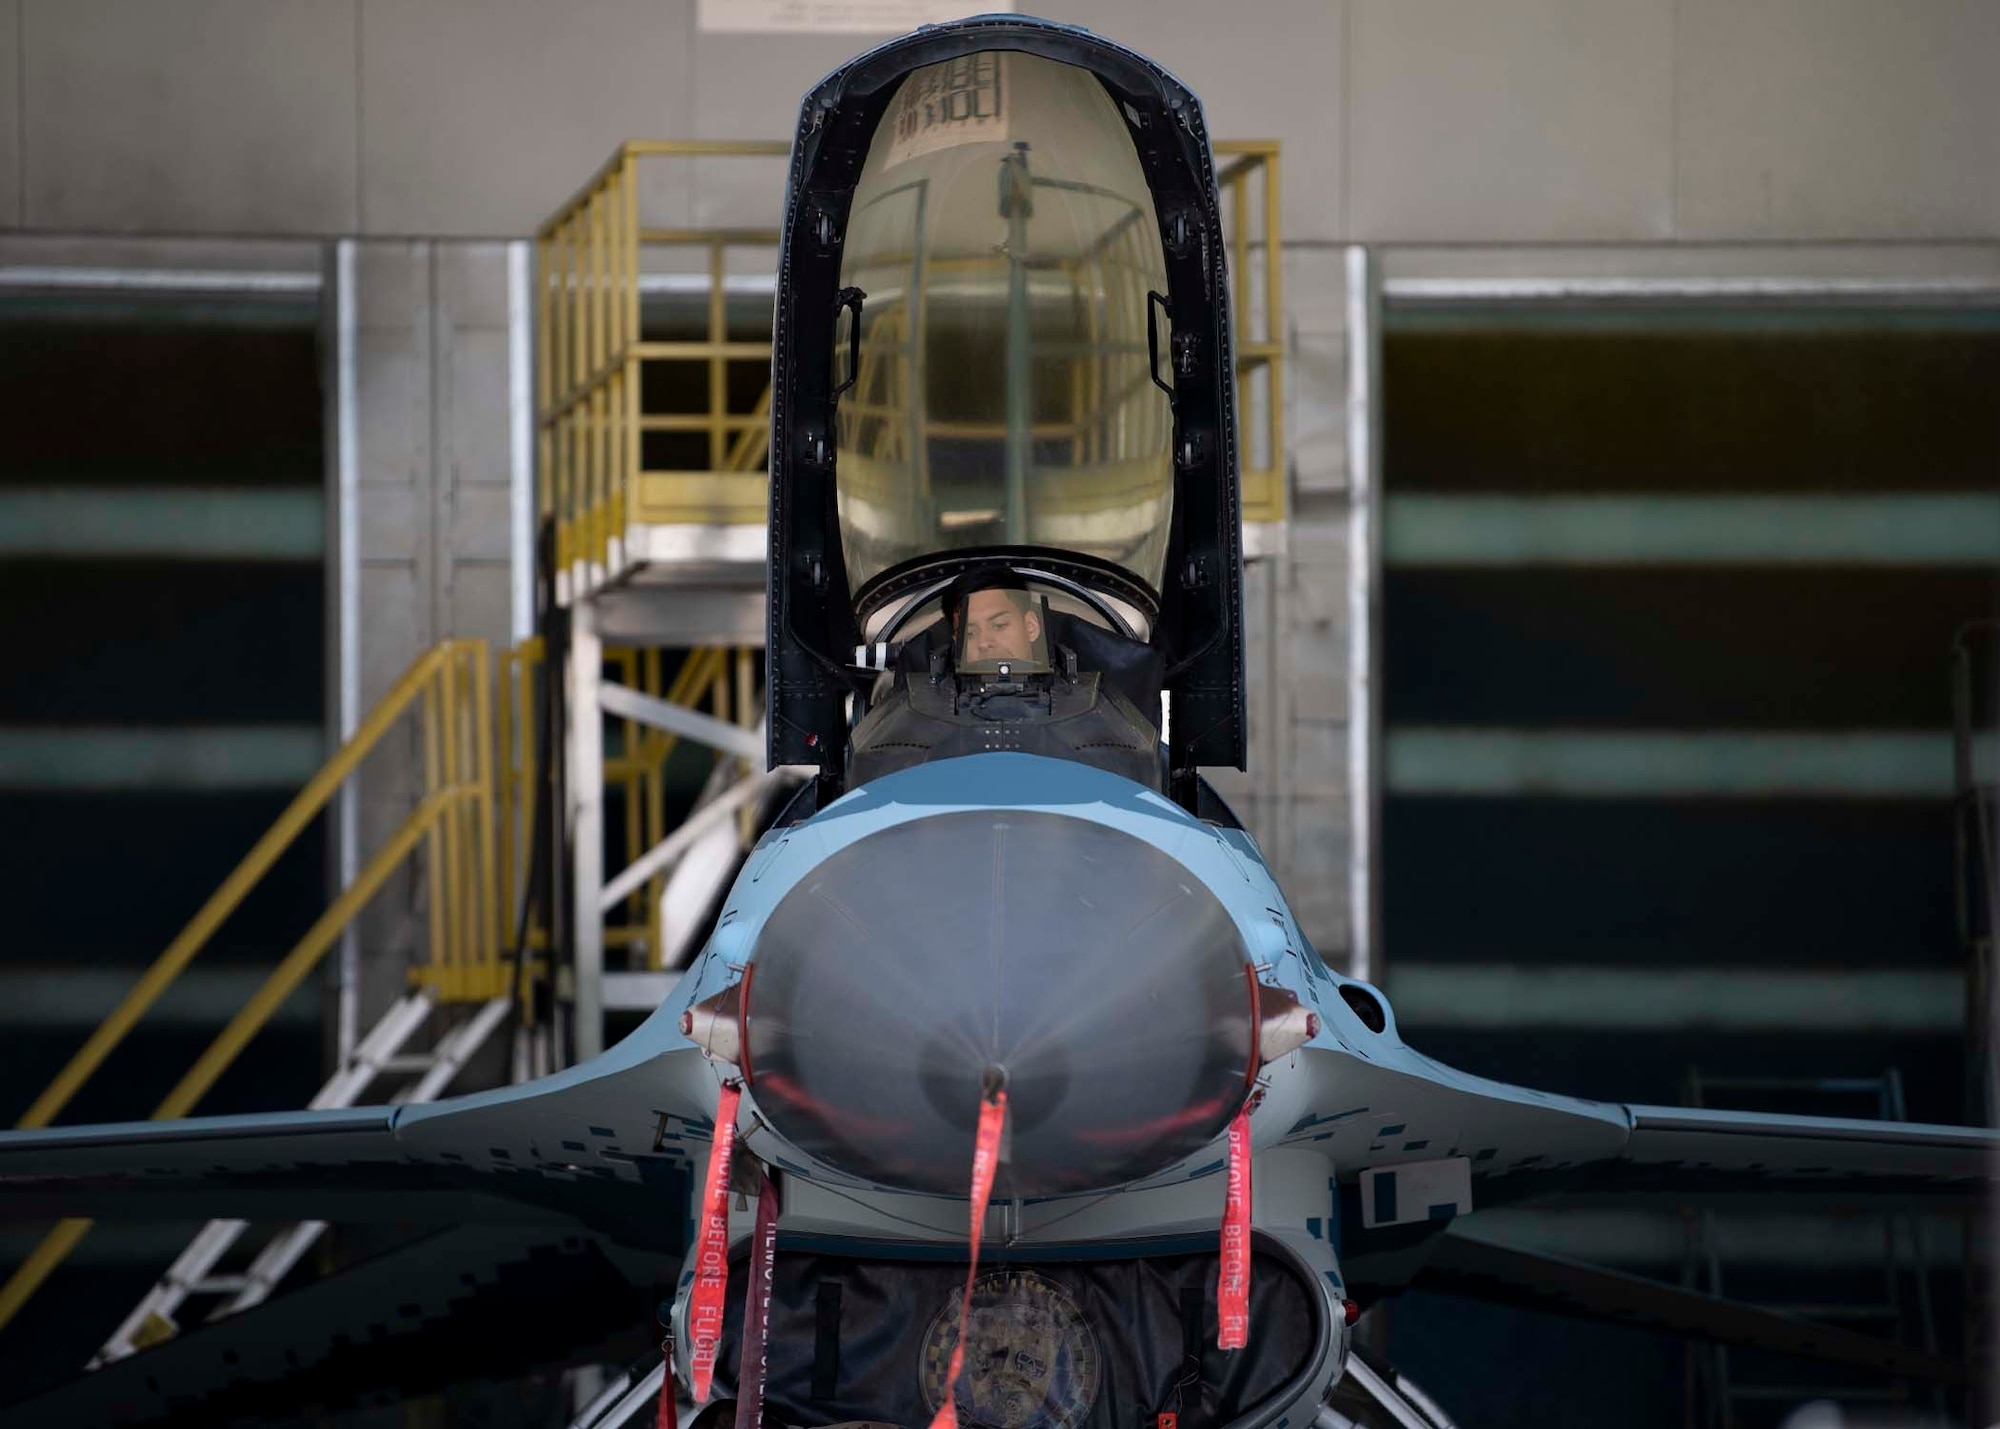 An Airman sits in the cockpit of an F-16 Fighting Falcon fighter jet.